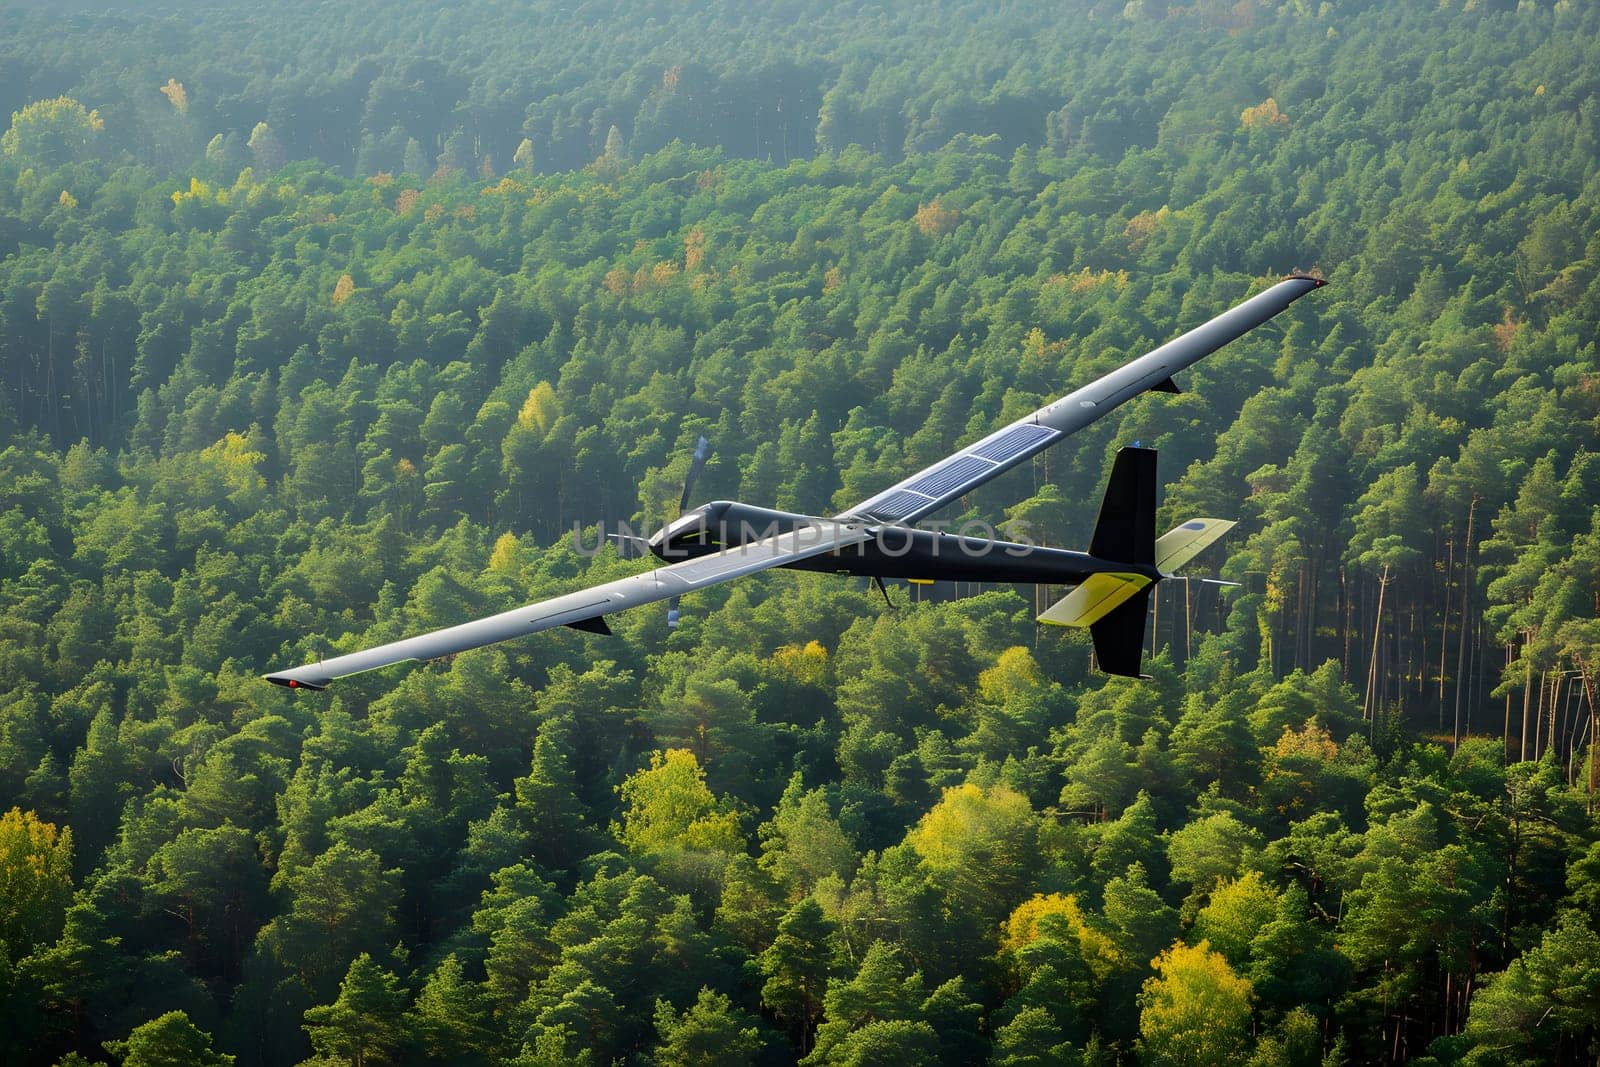 Solar-powered army drone in flight above green forest canopy, showcasing modern surveillance and renewable energy technology in military operations.